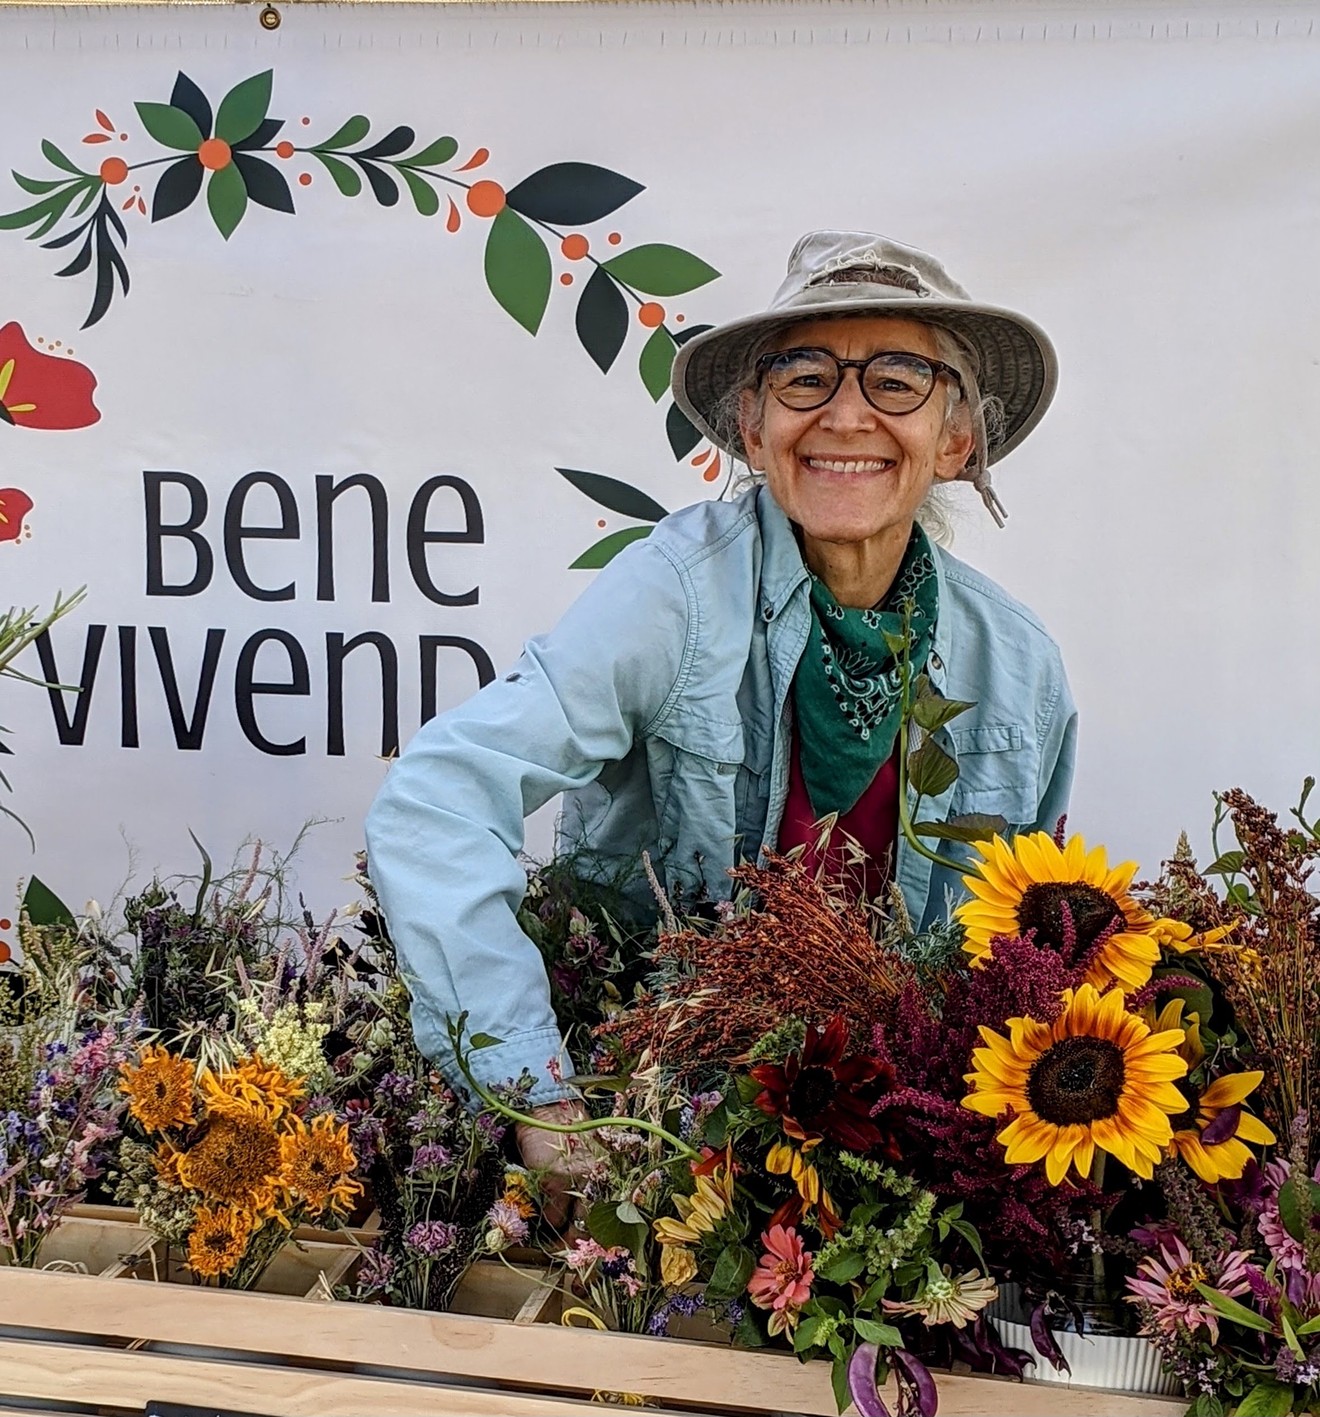 You can find Emily Heller with her edible flowers at Uptown Market on Wednesdays and Saturdays.